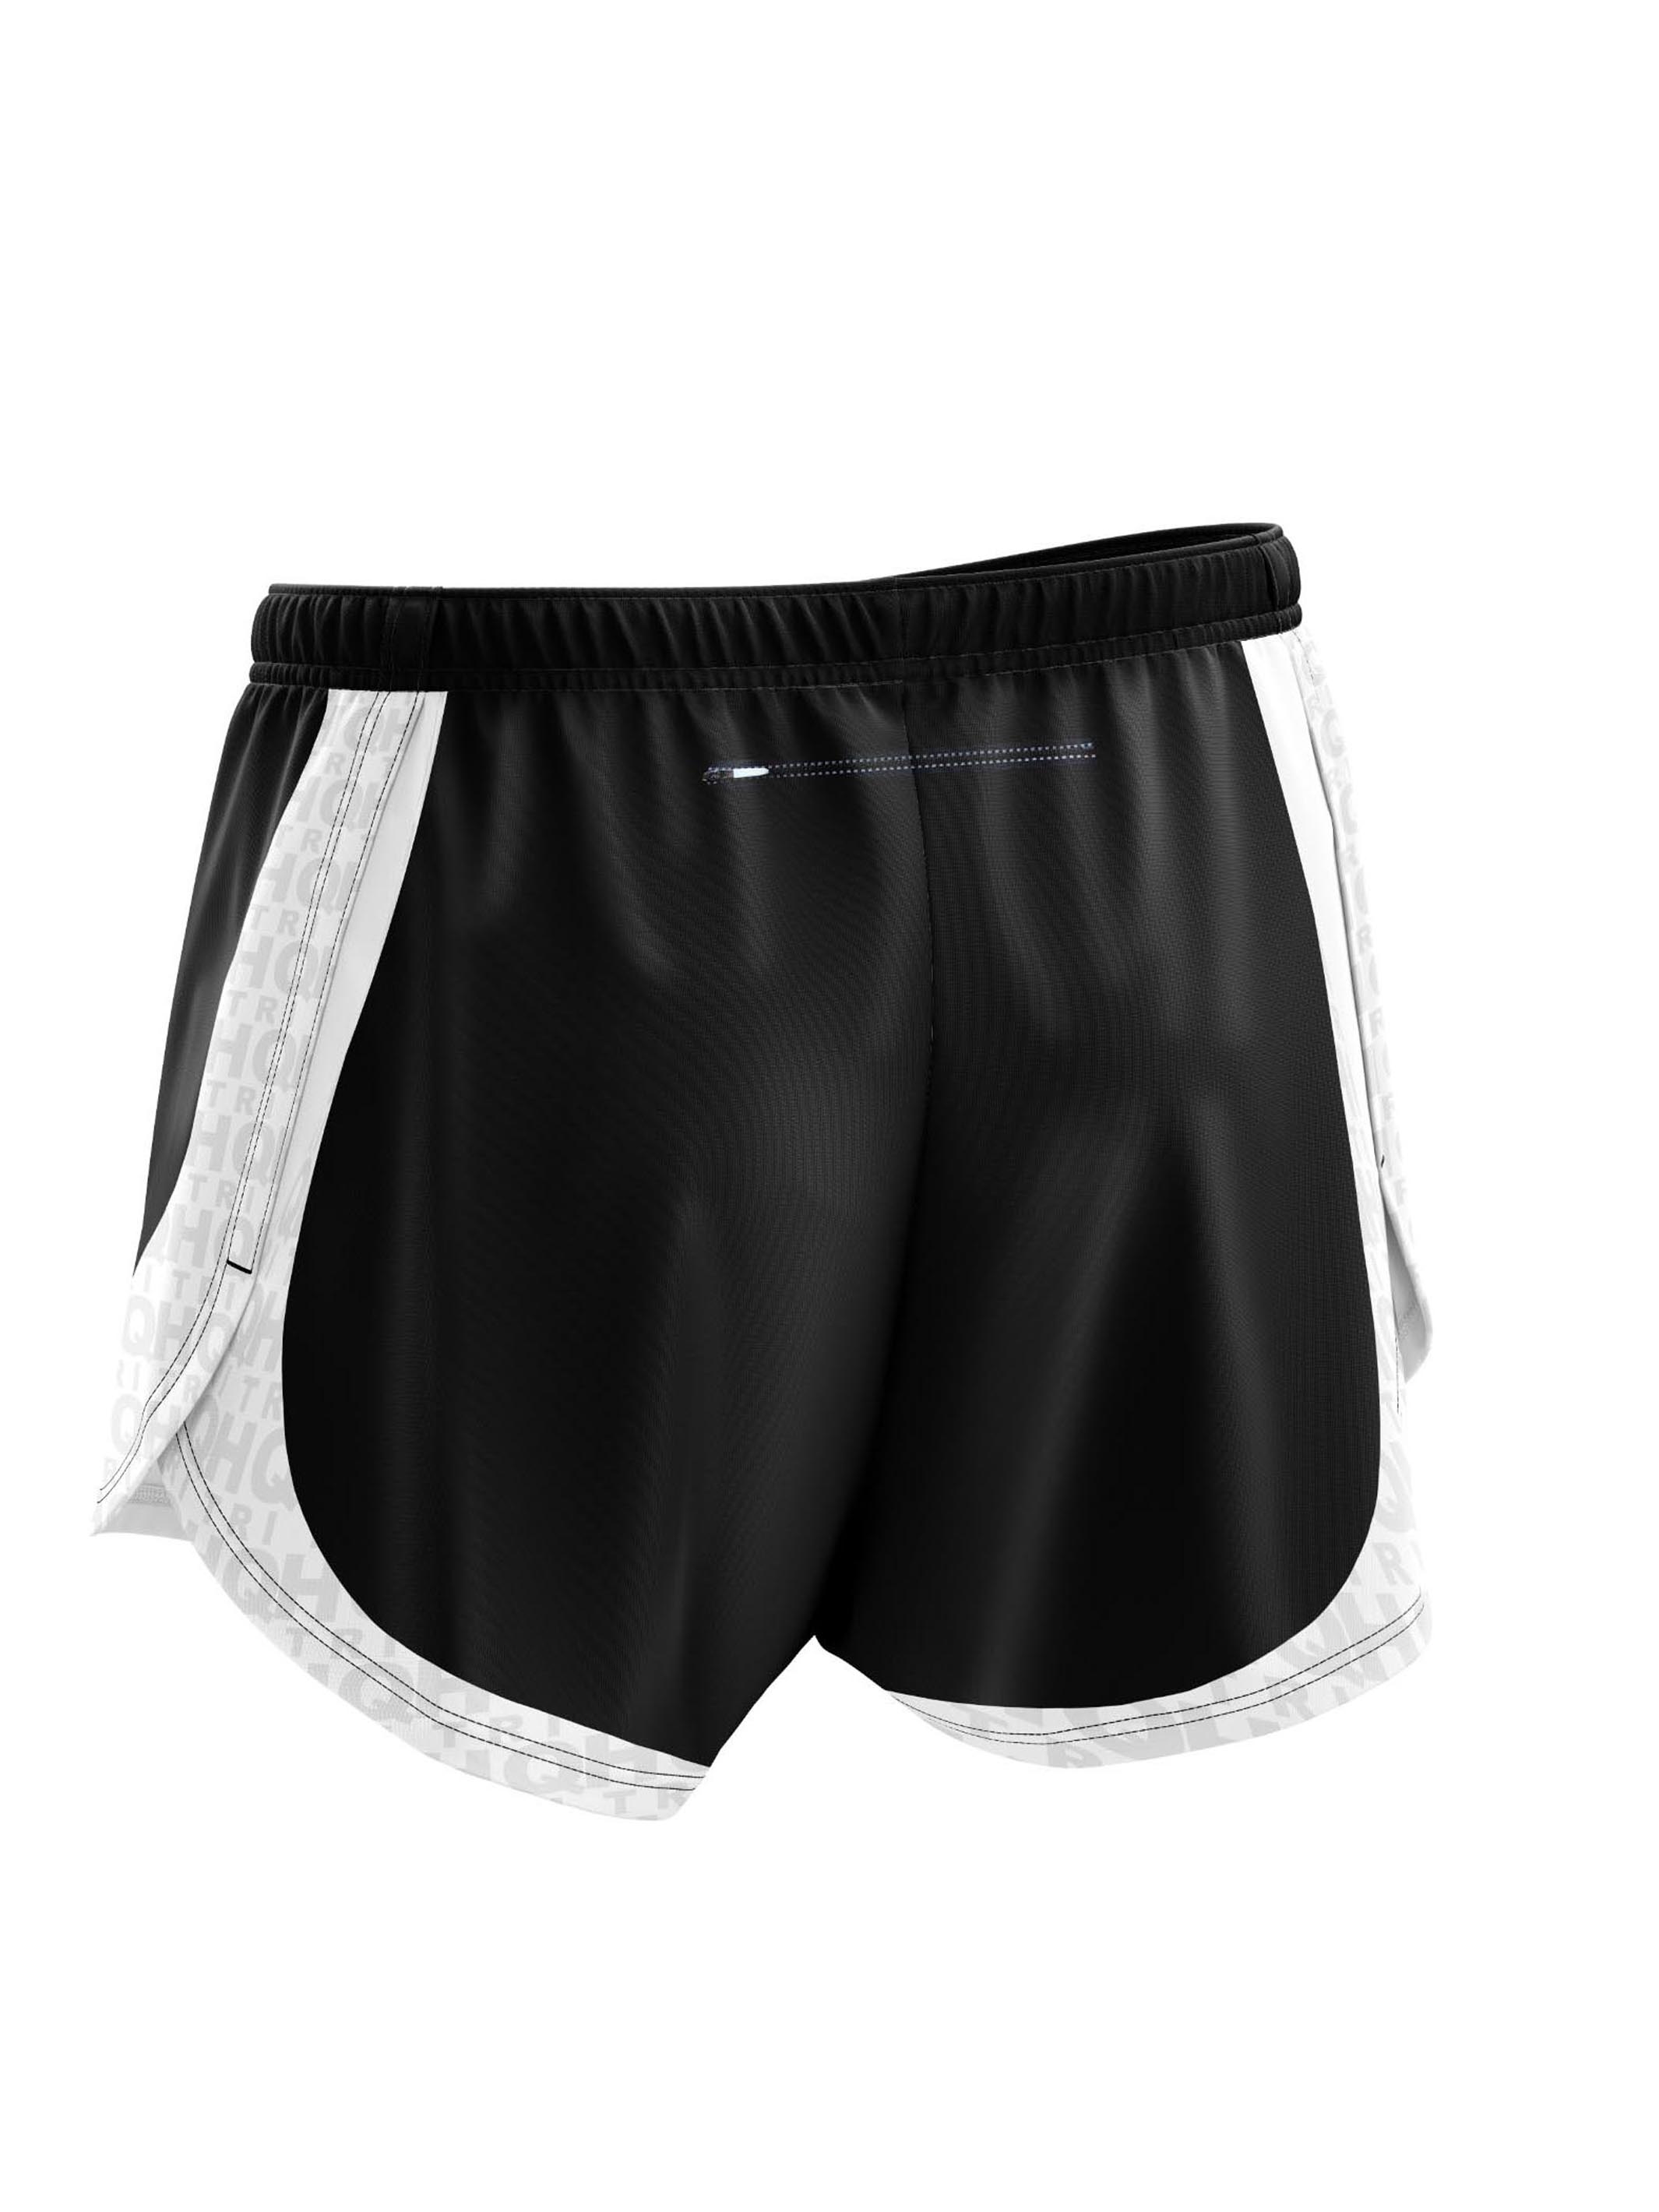 TRI HQ Butterfly Style Breathable running short